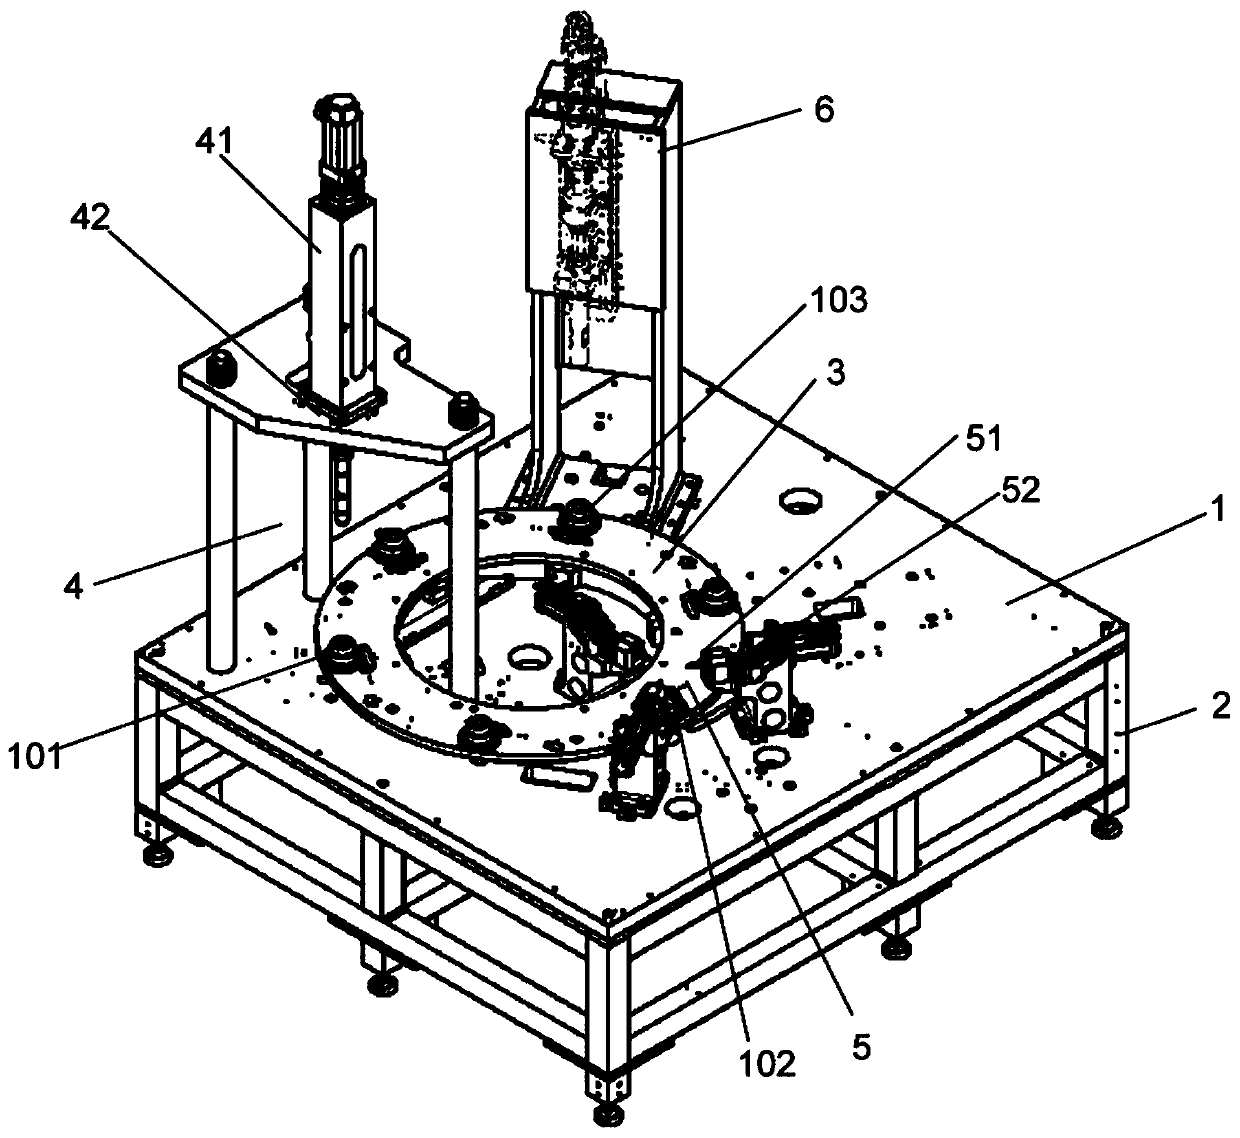 Multi-station assembly equipment for assembling vehicle components